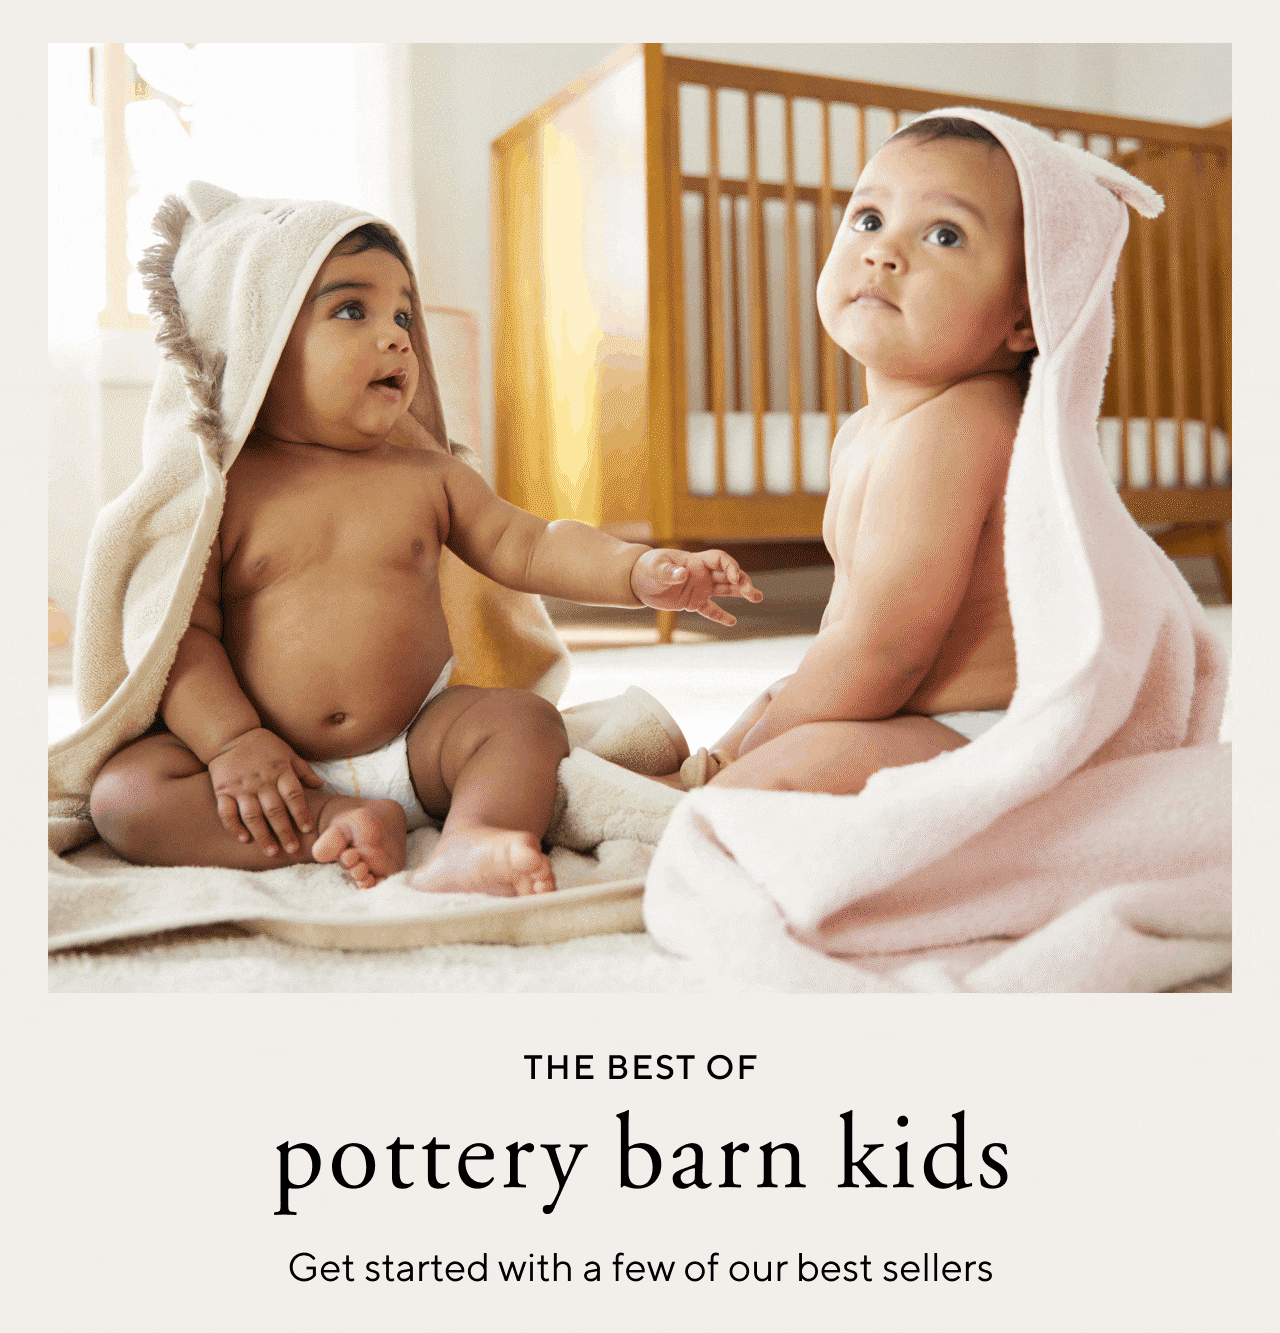 THE BEST OF POTTERY BARN KIDS!